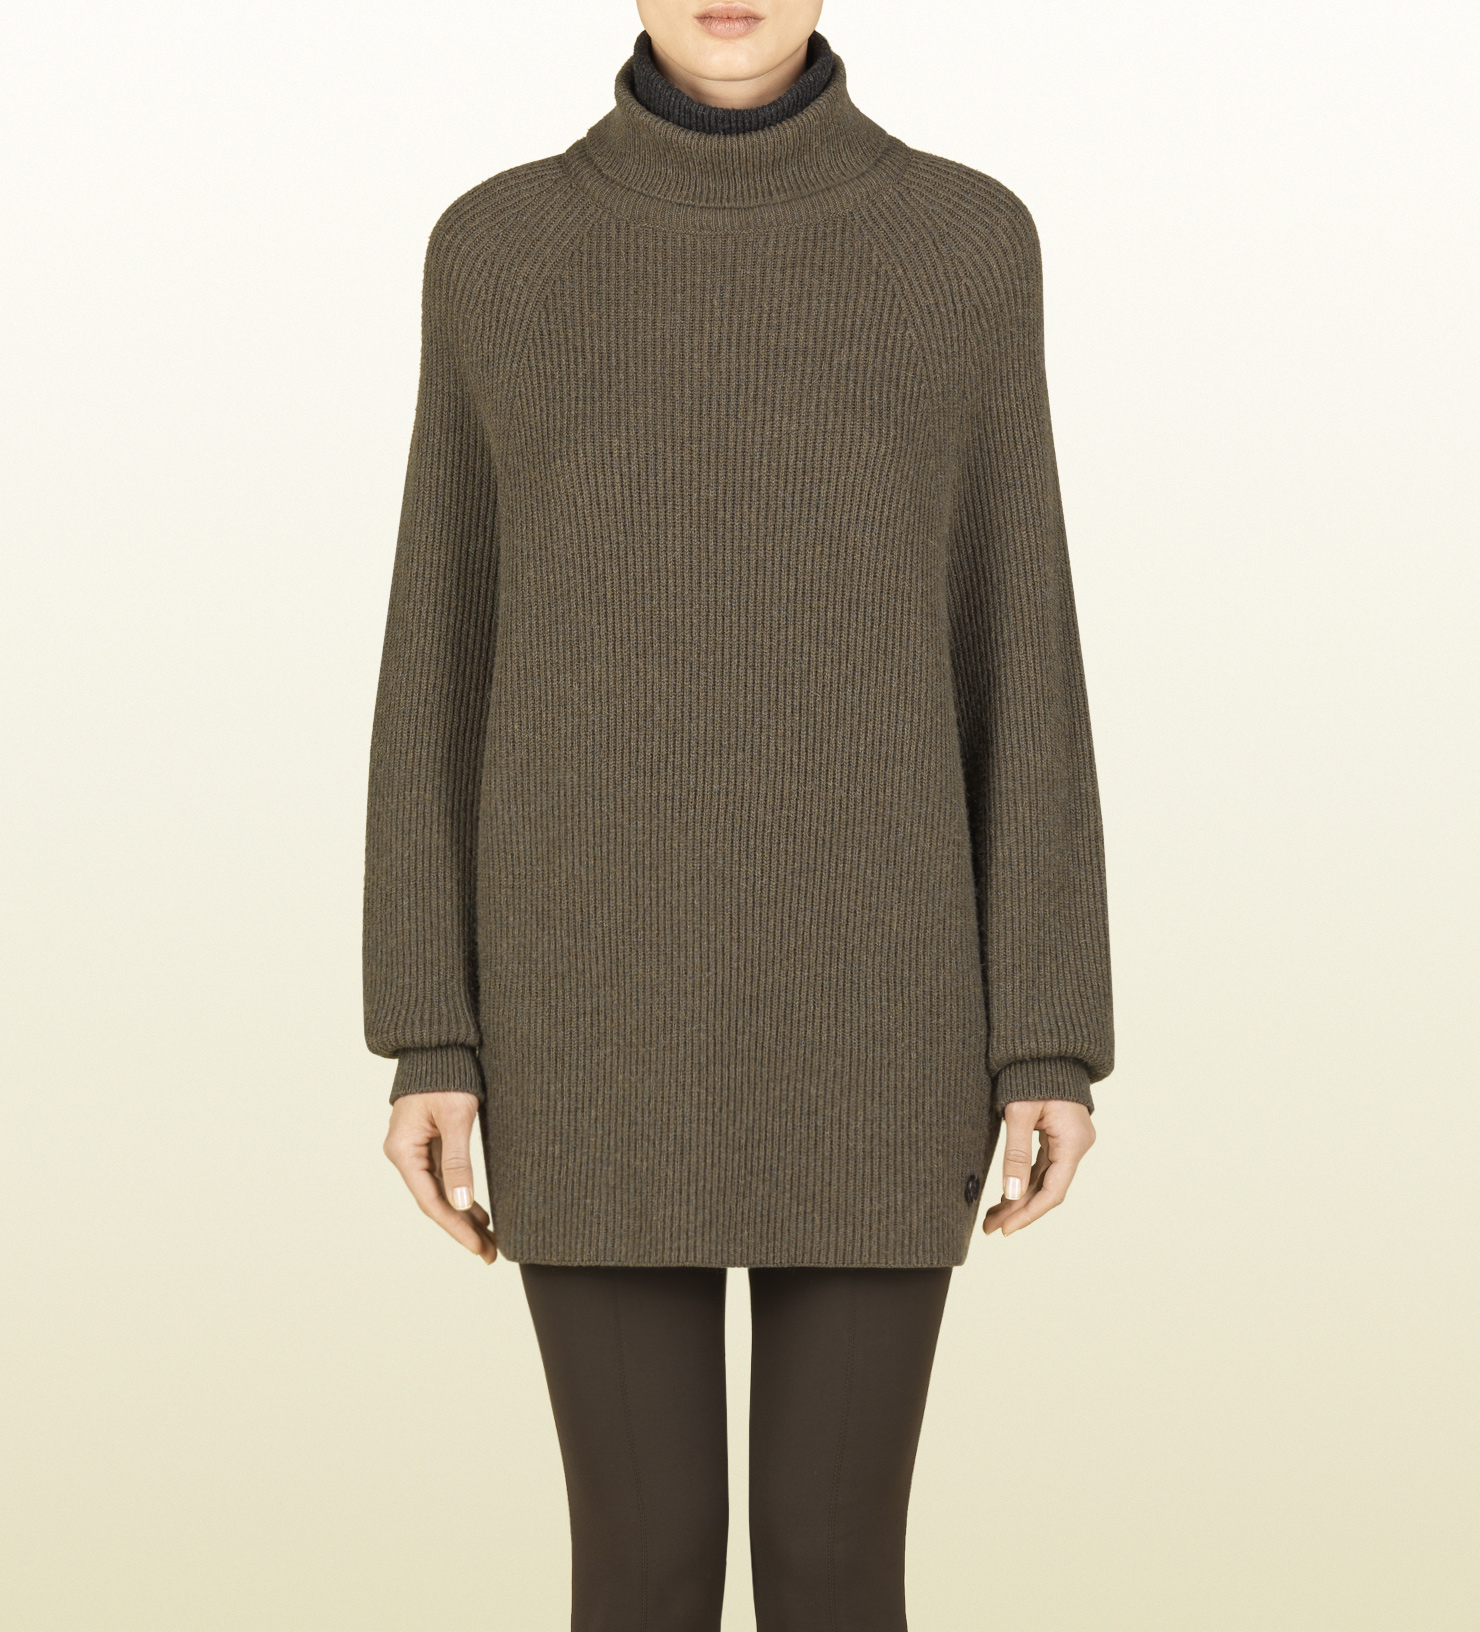 Gucci Light Brown Turtleneck Oversize Sweater in Brown | Lyst